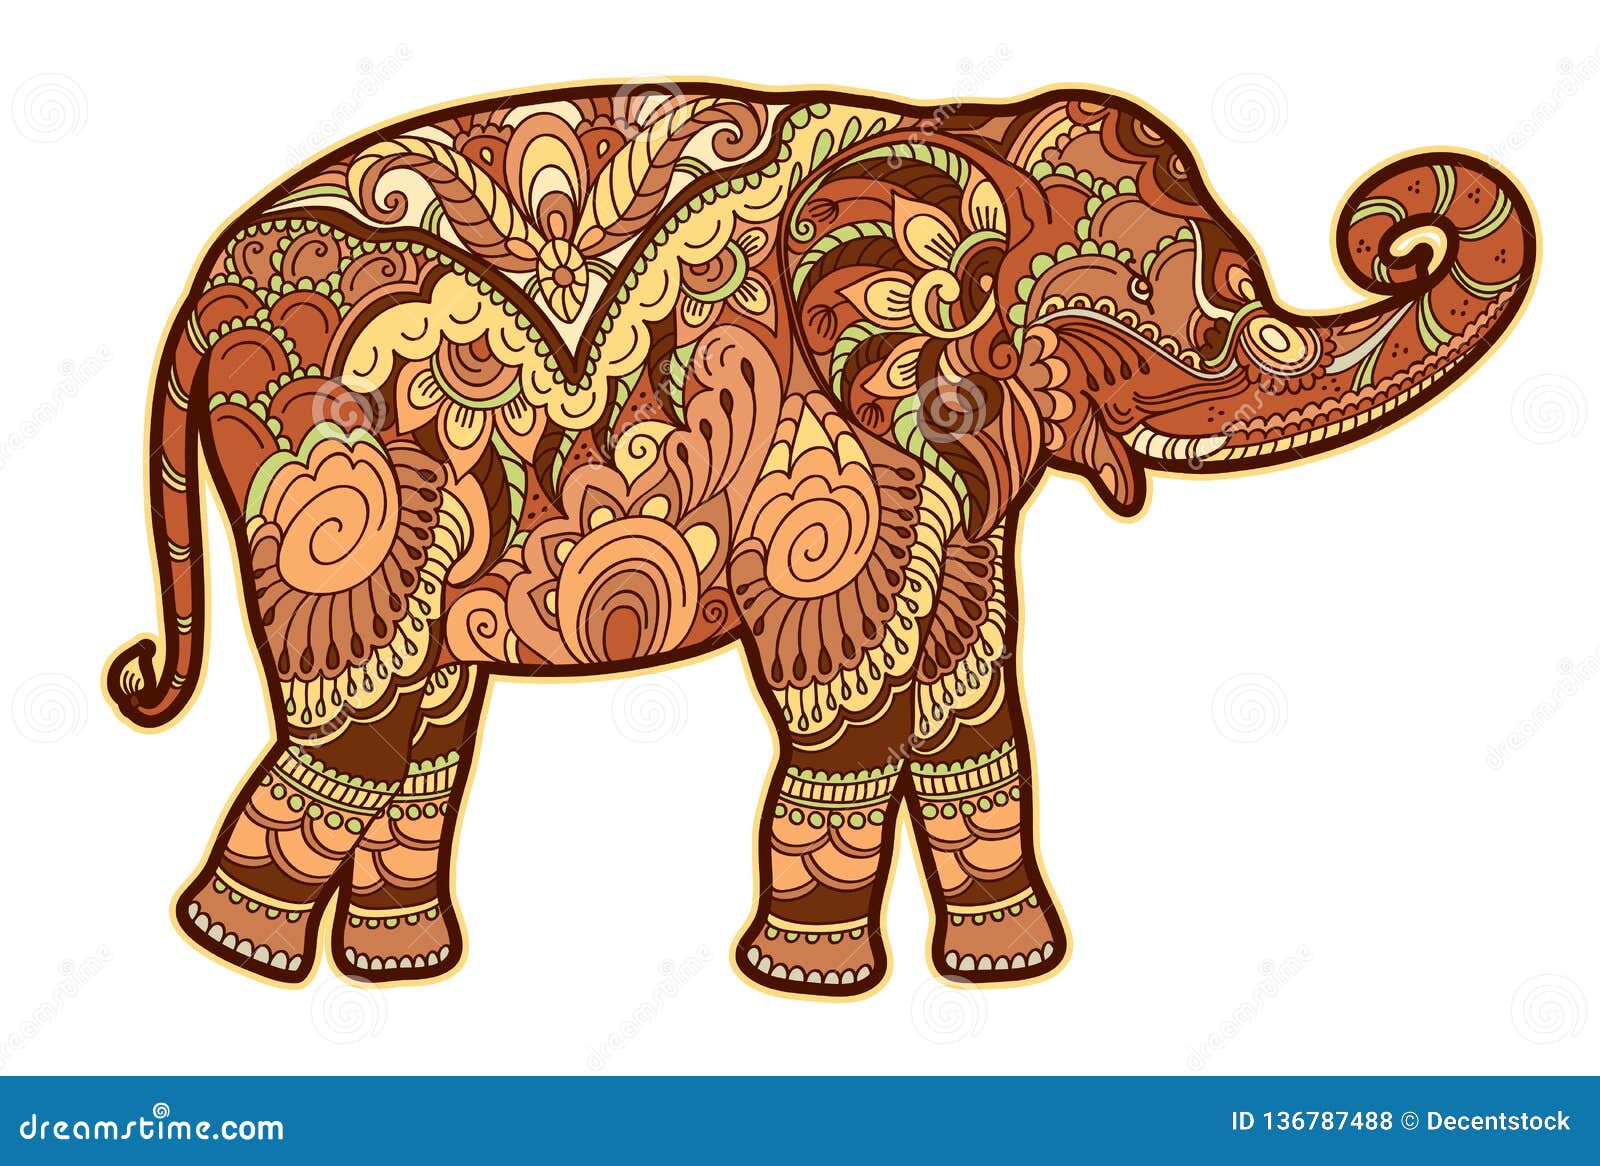 Drawing Stylized Elephant. Freehand Sketch for Adult Anti Stress ...